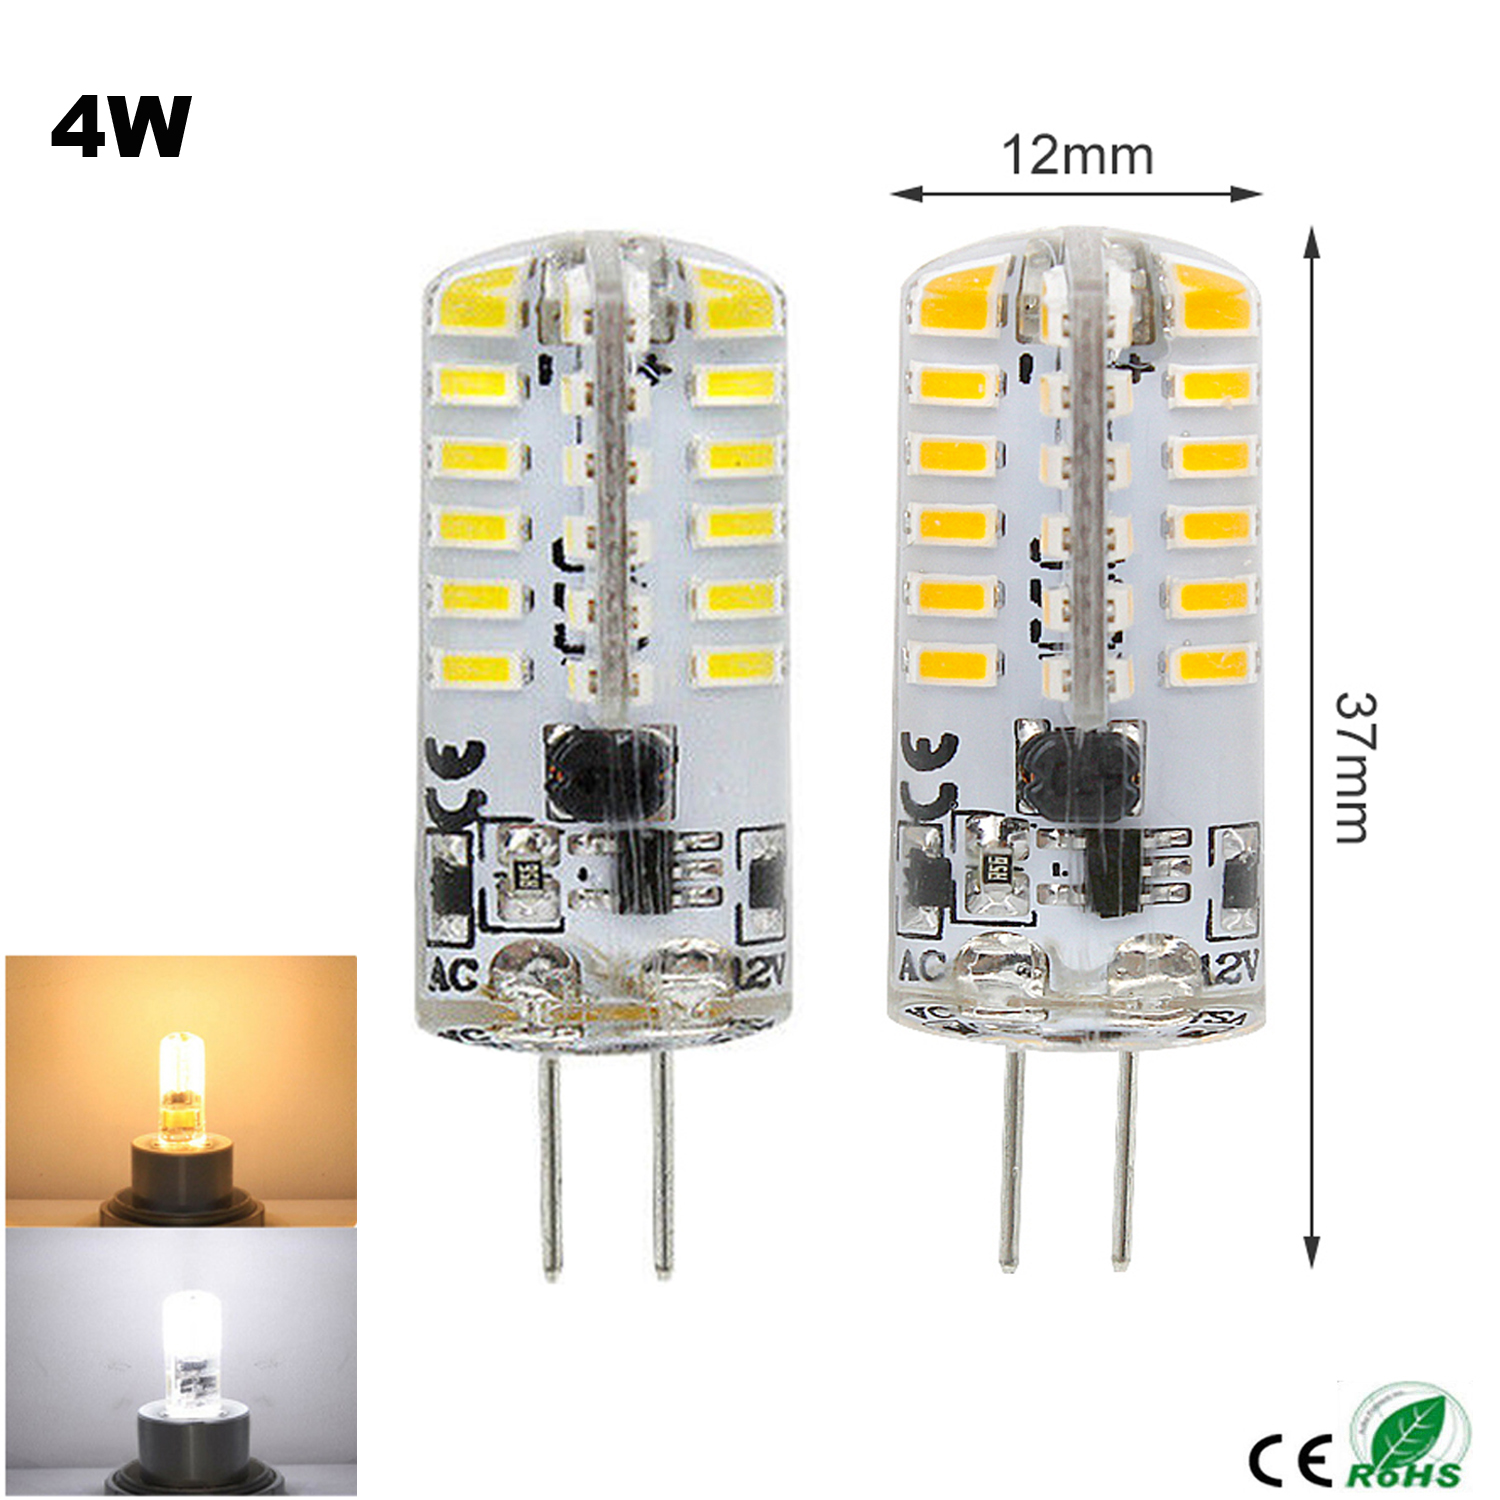 LED G4 G9 Ampoule 2W 3W 5W 6W 8W 9W 10W 12V 220V SMD Remplacer Chaud Froid  Lampe